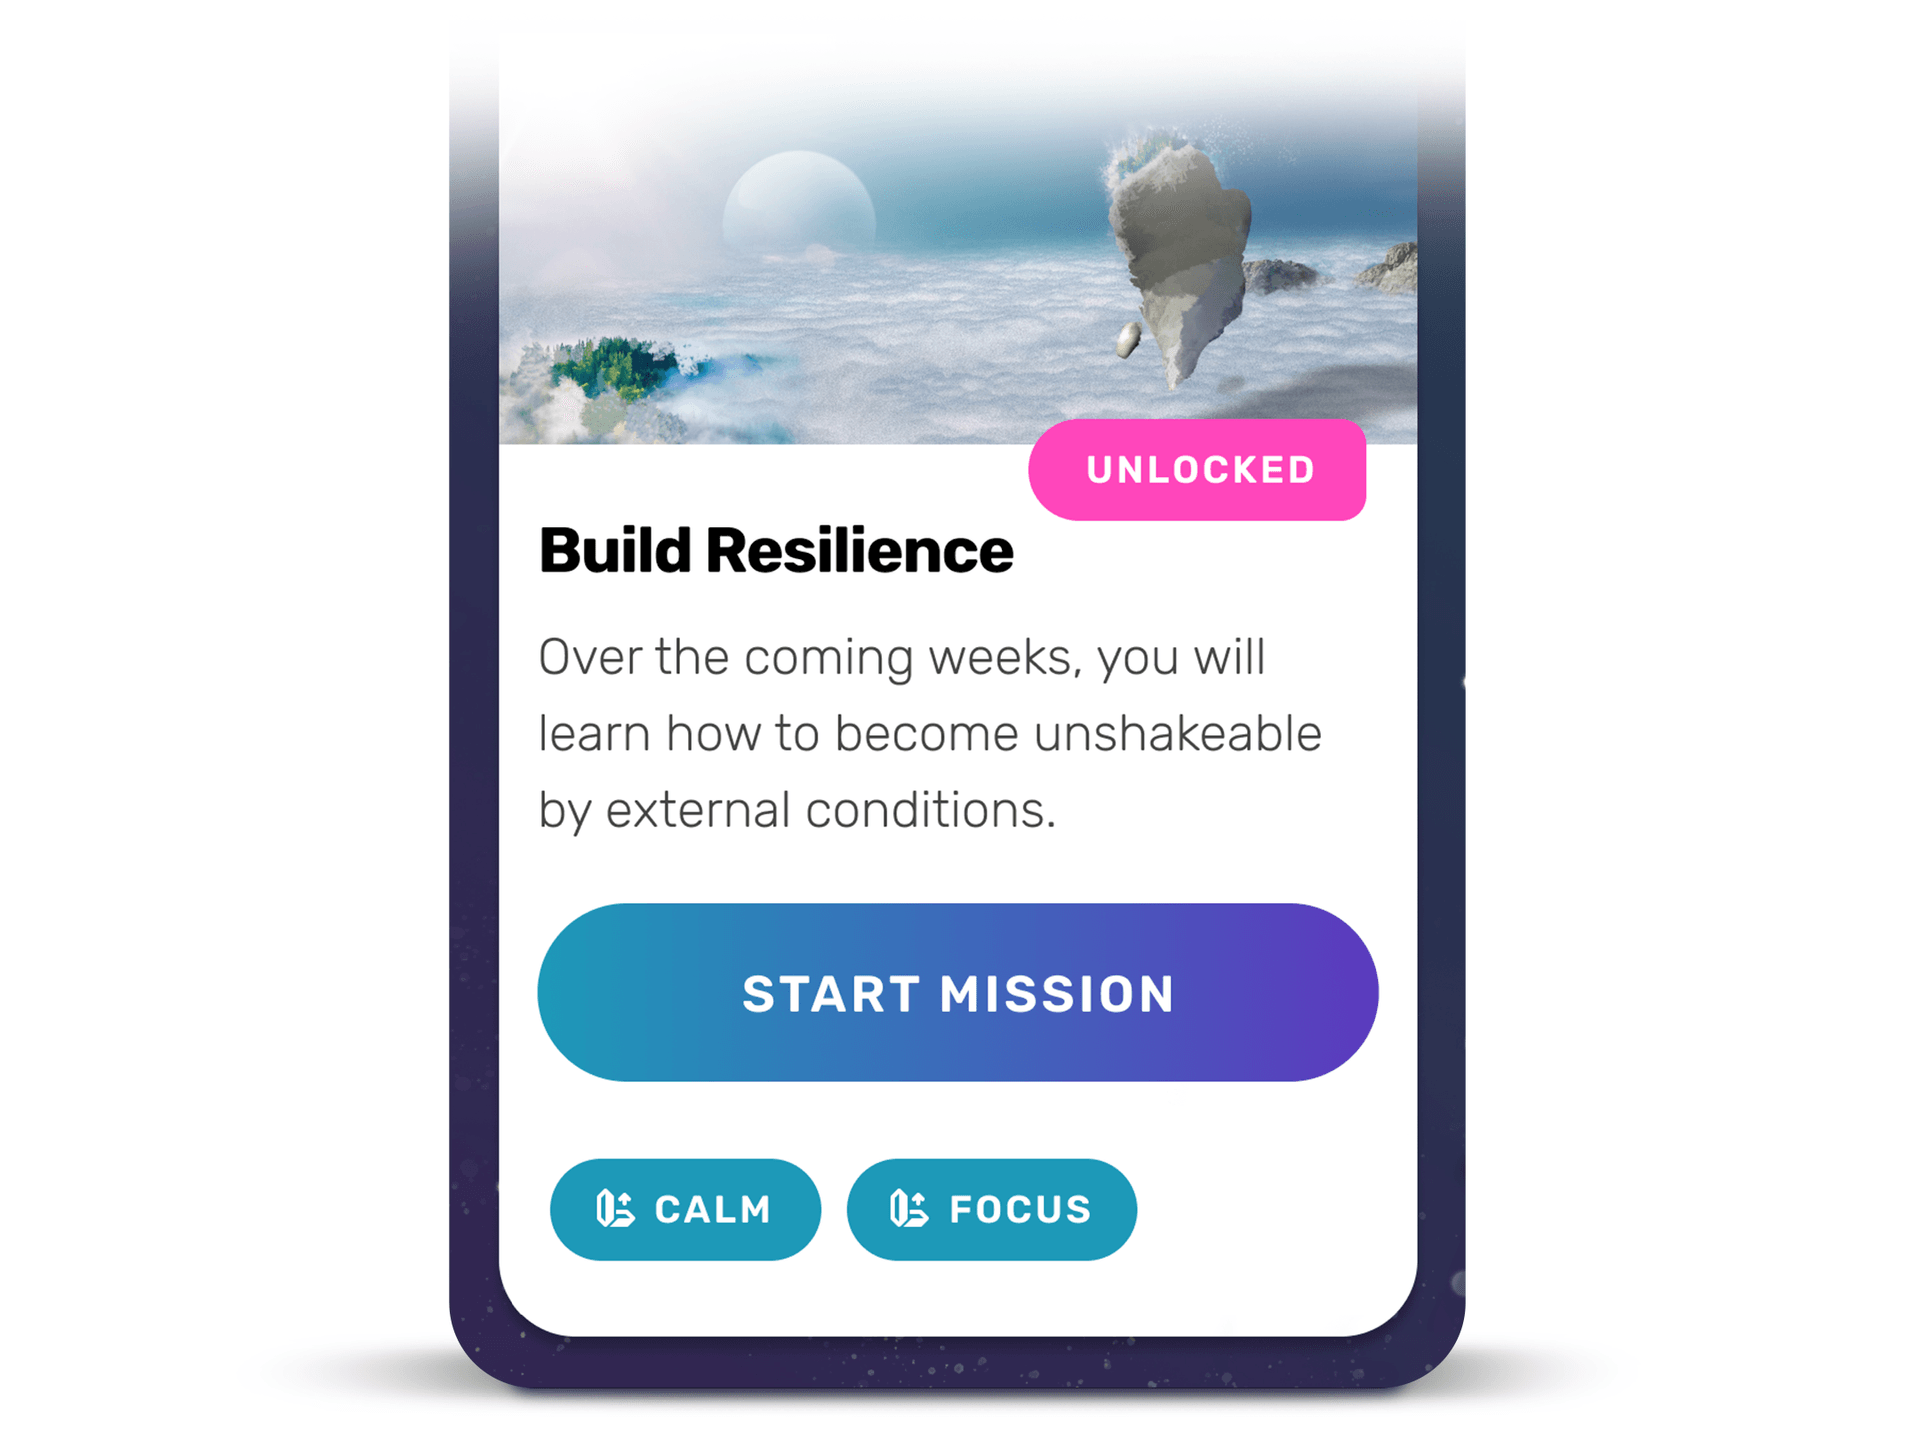 Sens.ai's app start of mission screen shot to build resilience